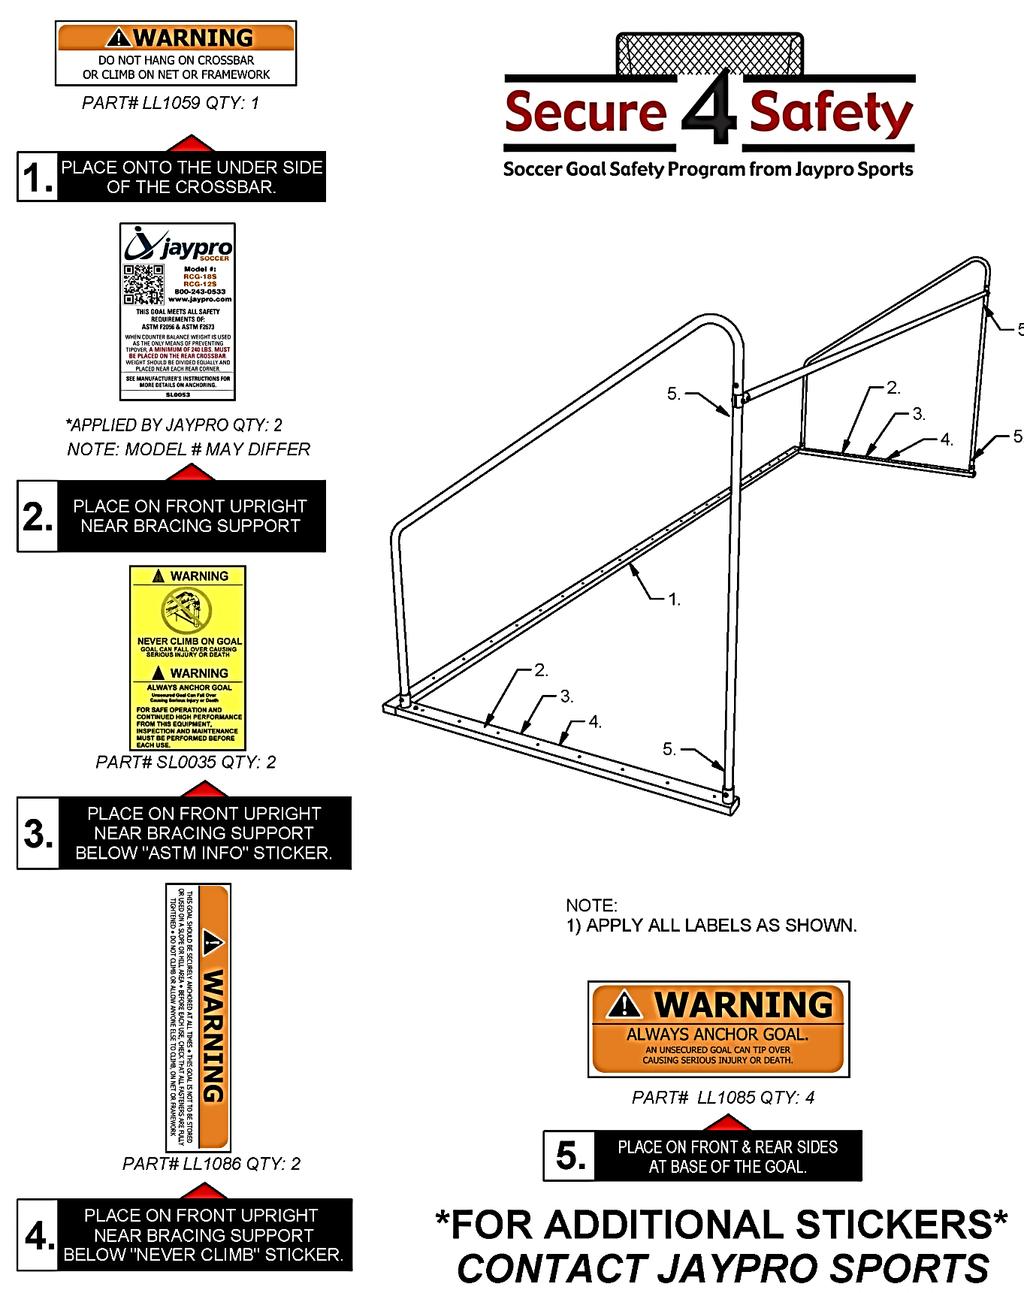 Safety / Warning Labels: Safety and Warning labels, as required to meet ASTM Standards, are an important component to any soccer goal. Place labels according to the diagram below.